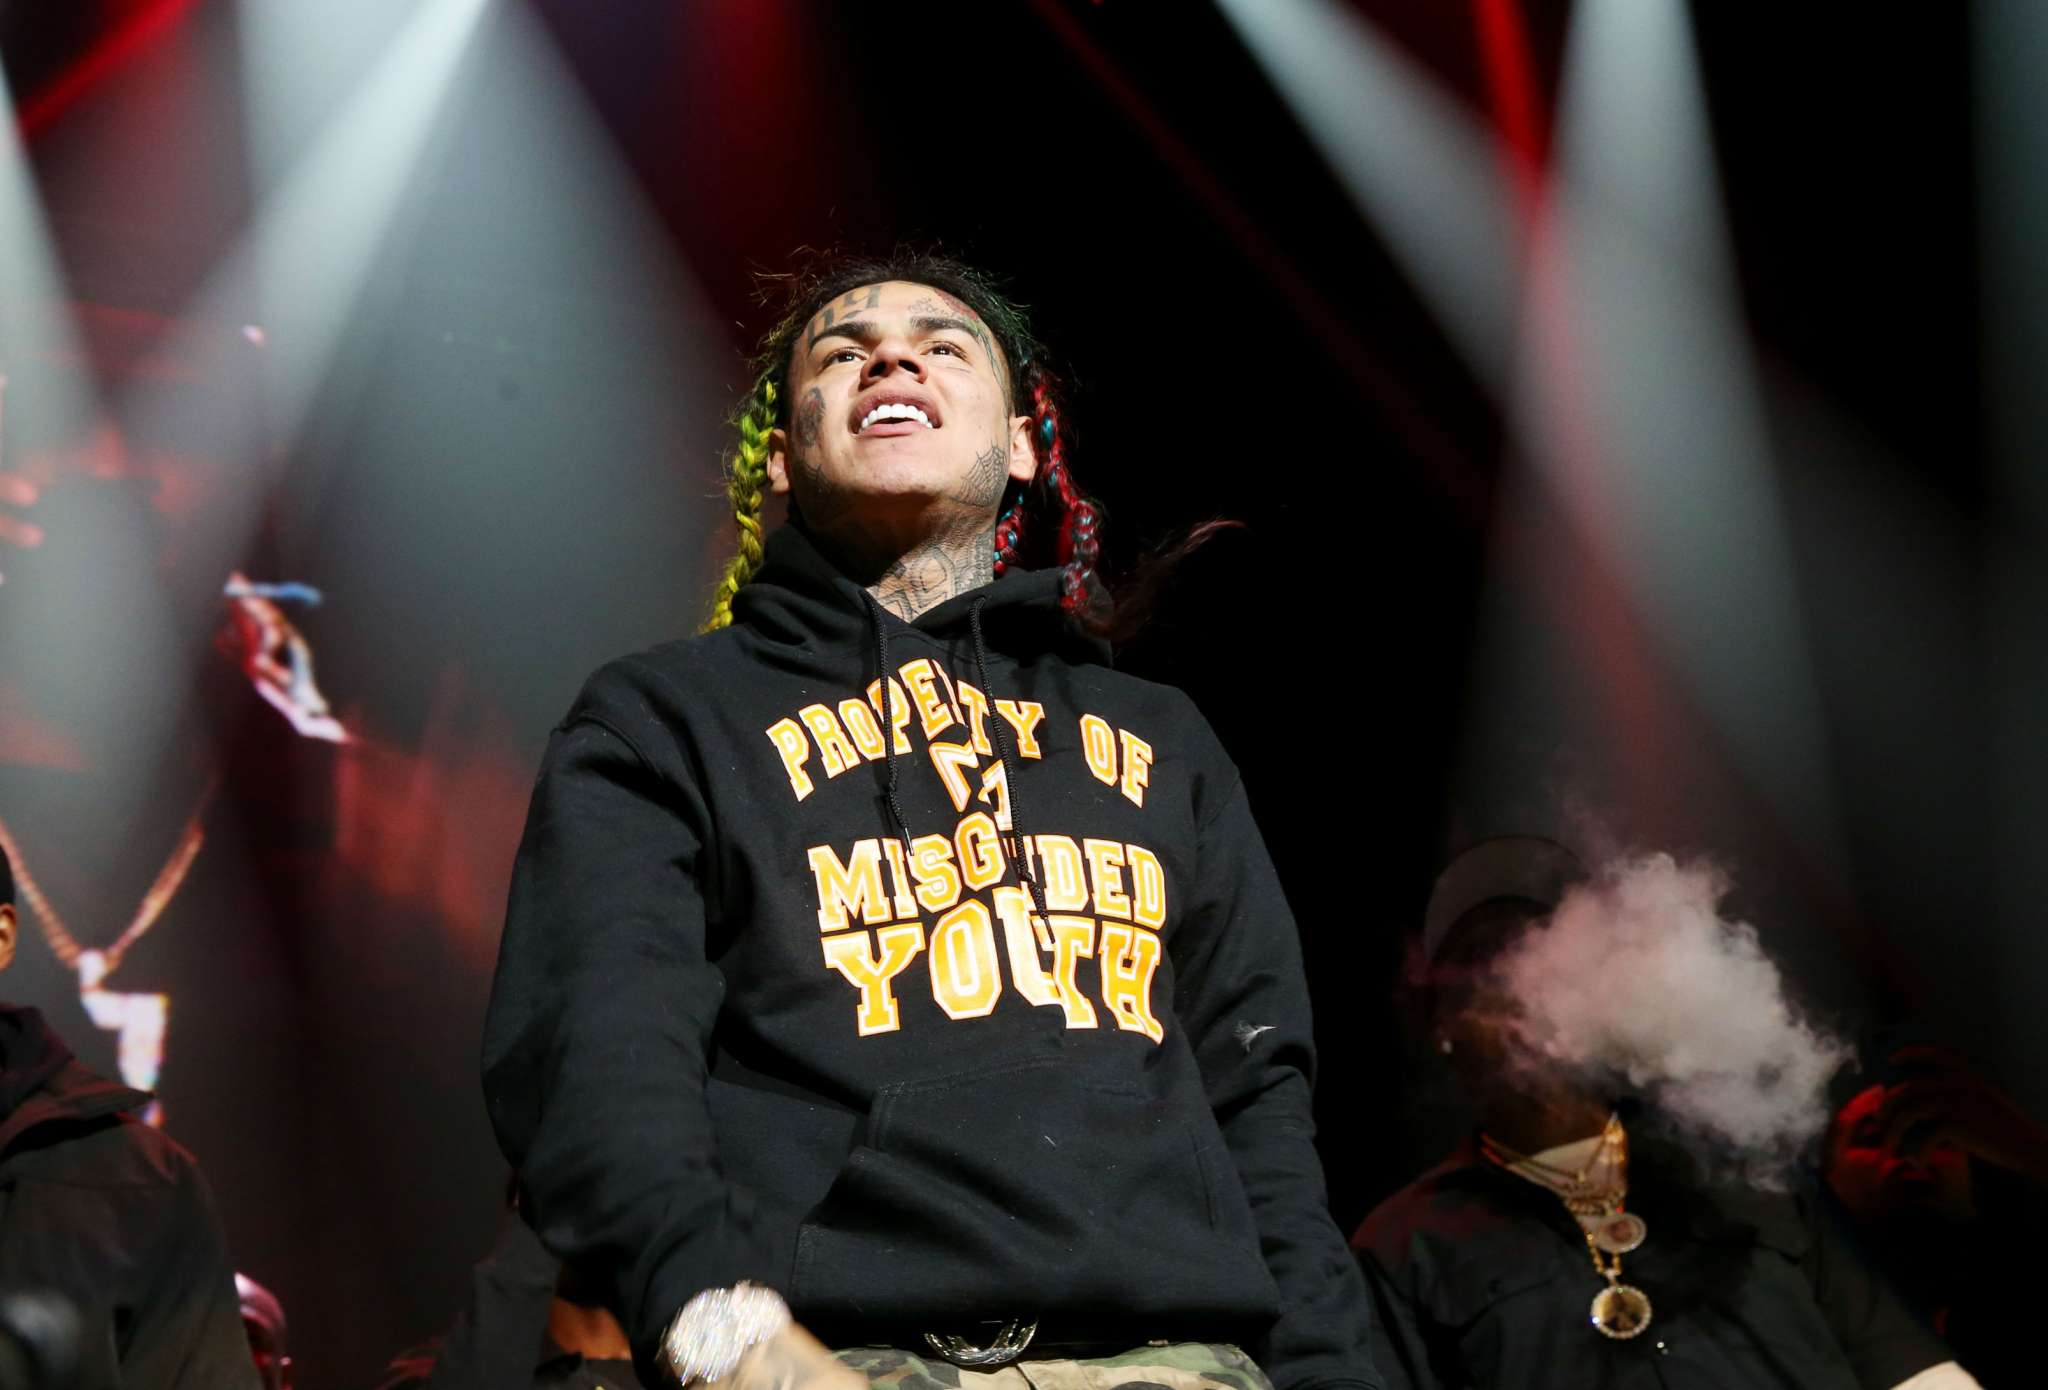 Three More Of Tekashi's Associates Have Been Reportedly Indicted In The Chief Keef Shooting - 69 Pin Pointed The Gunman And Now People Call Him 'Snitch'